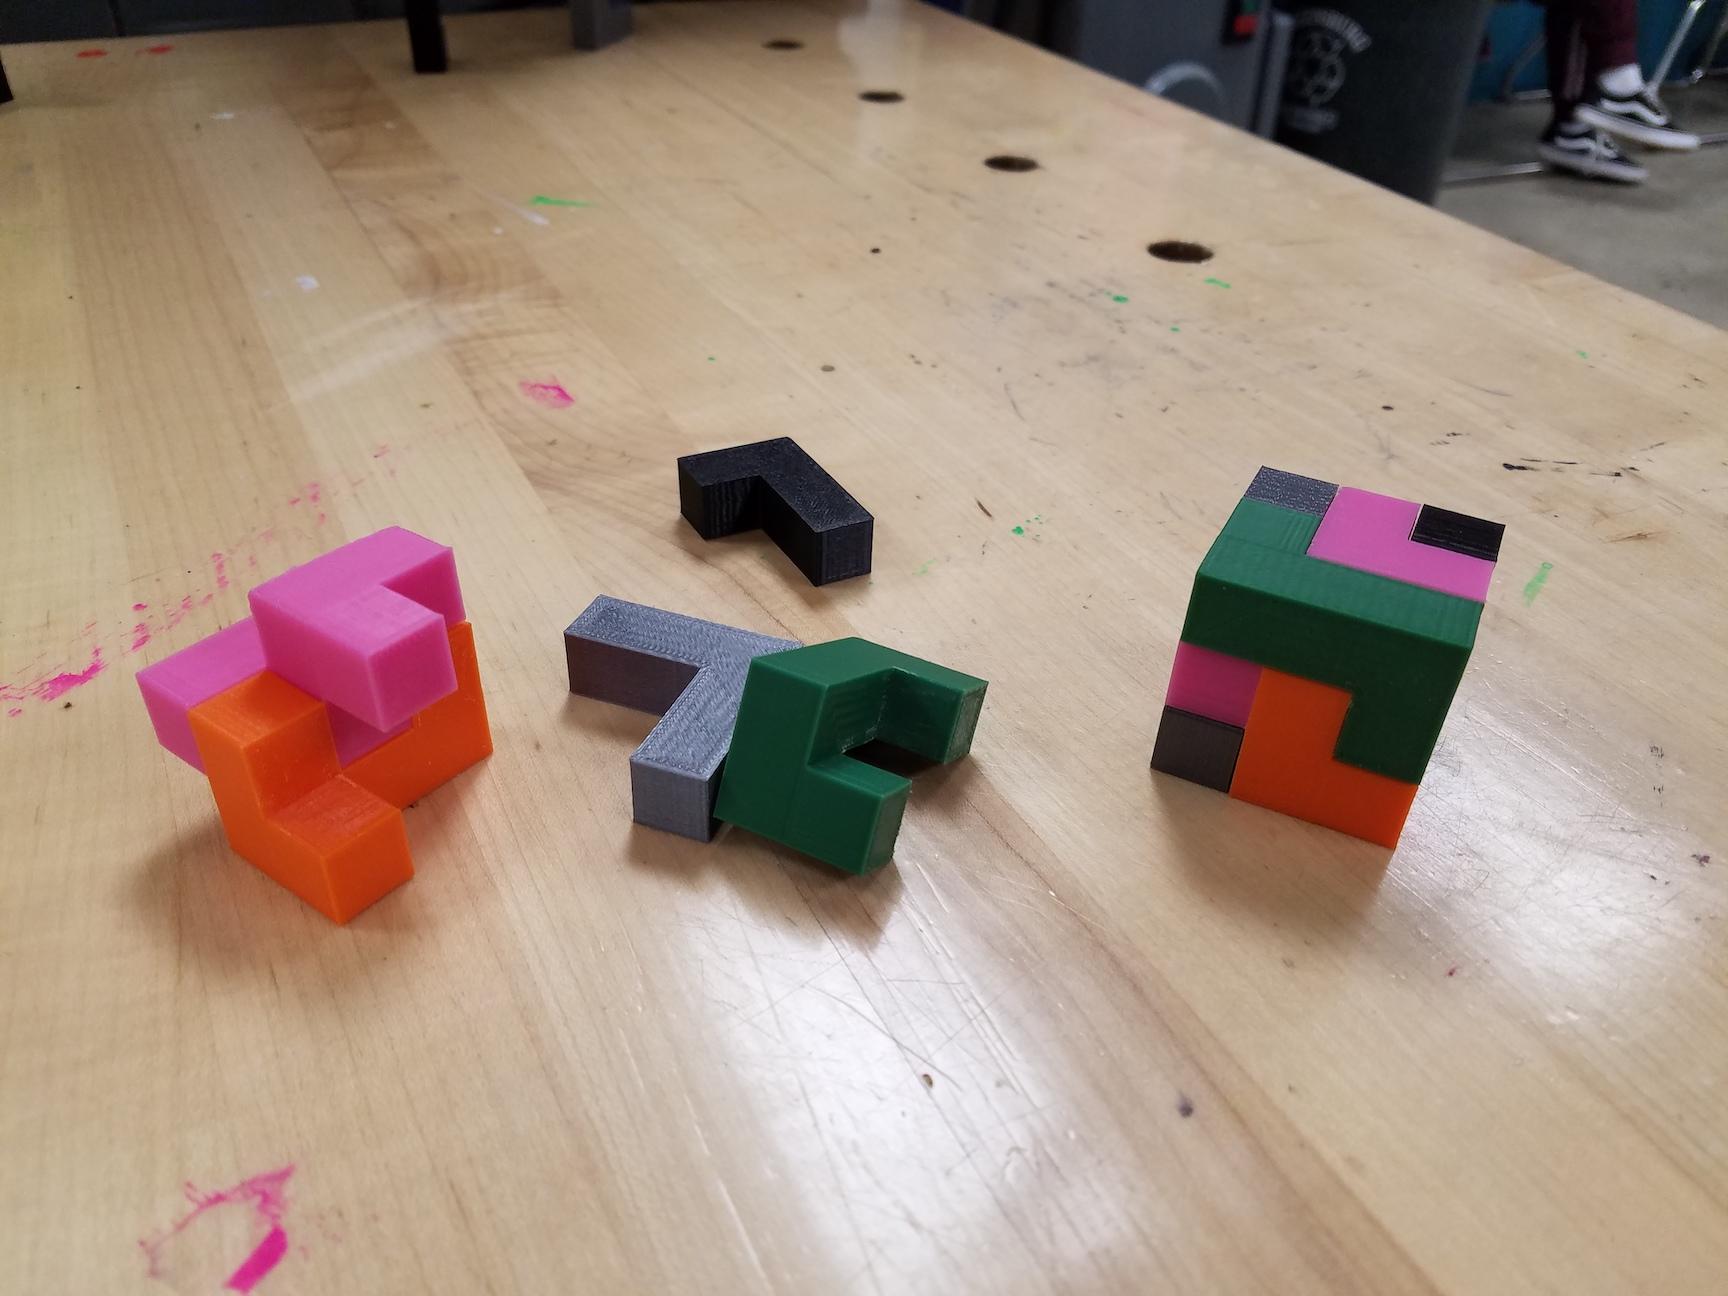 the finished puzzle cubes